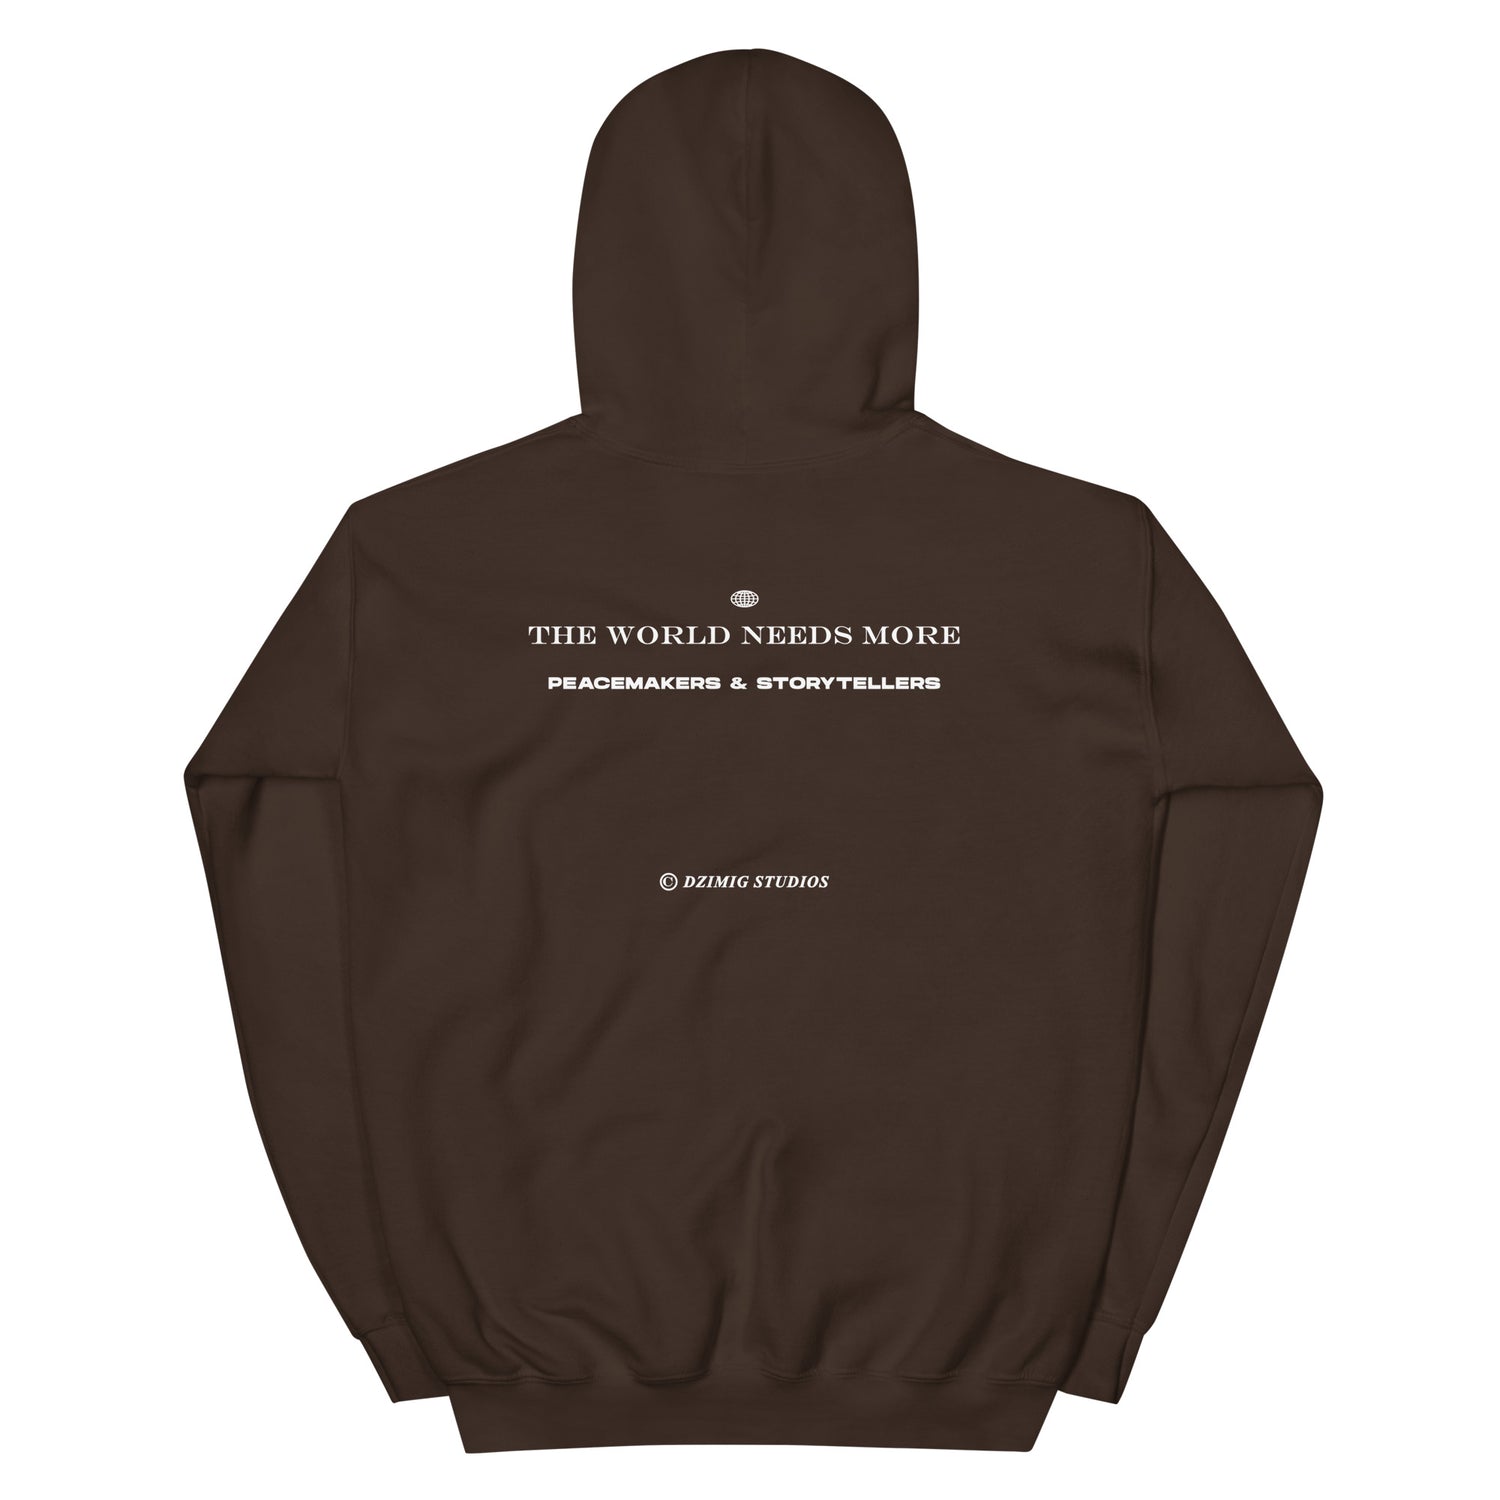 Unisex hoodies. PEACEMAKERS HOODIES are curated and designed under Dzimig Studios' Peace Campaign Project. These hoodies are soft, smooth, stylish and perfect choice for everyday wear.